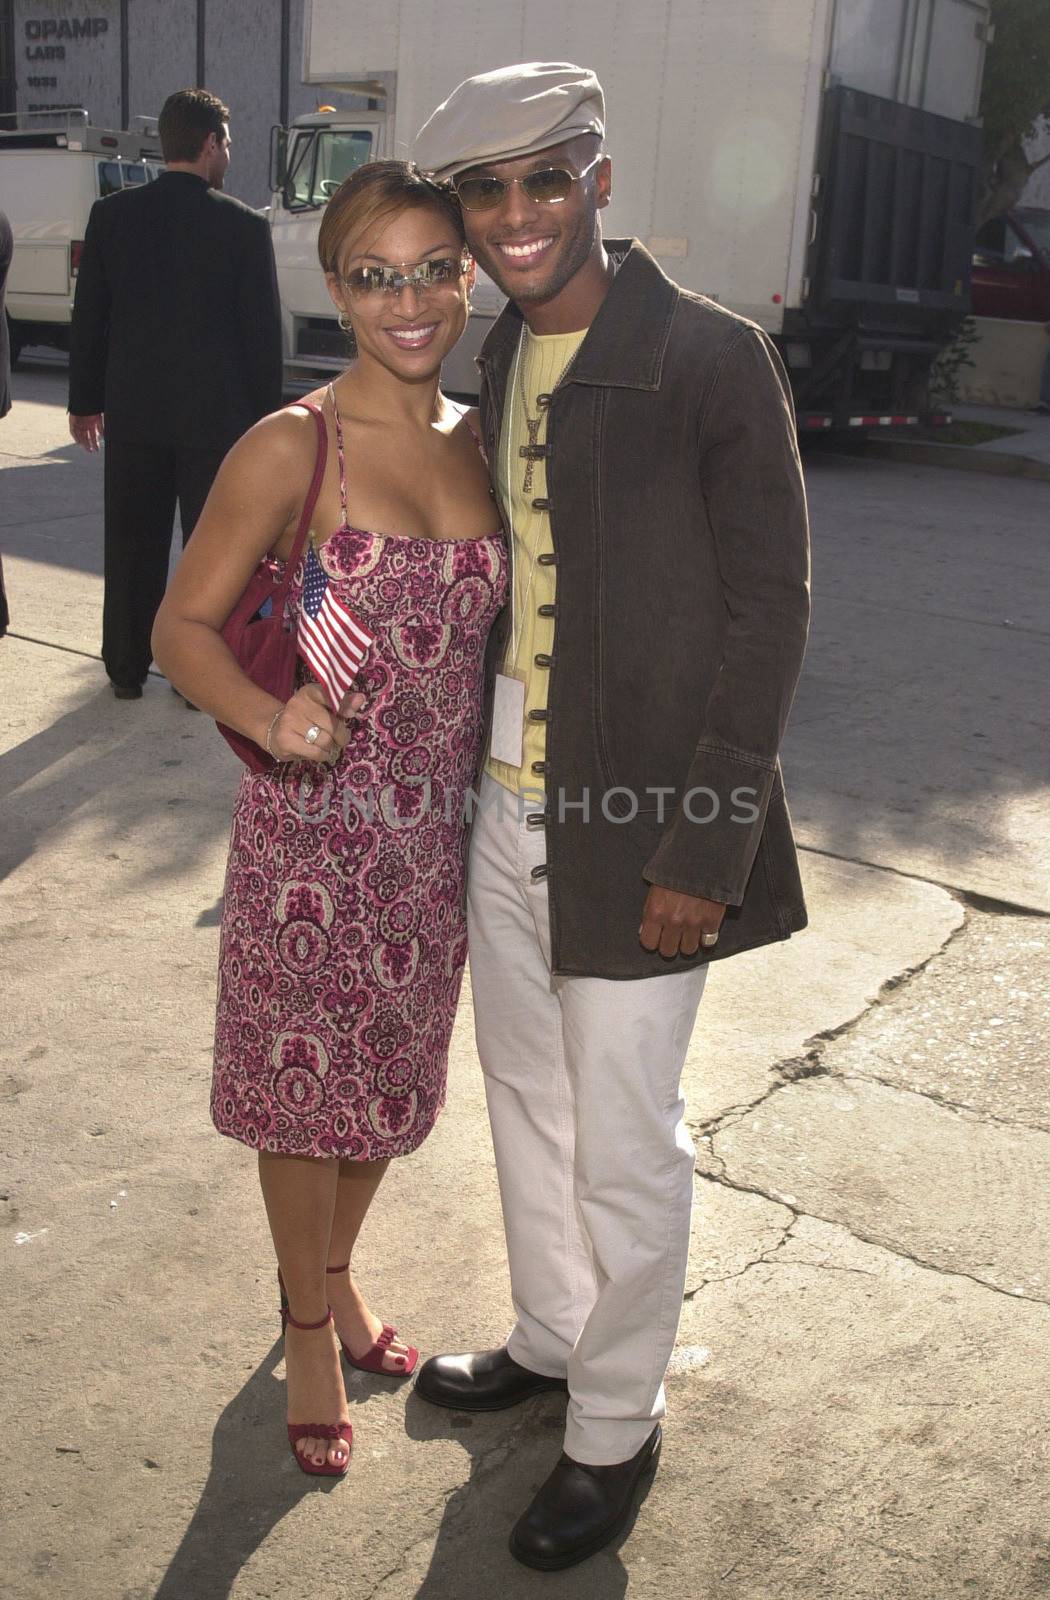 CHANTE MOORE and KENNY LATIMORE at the celebrity recording of "We Are Family" to benefit the victims of New York's 9-11 tragedy, 09-23-01